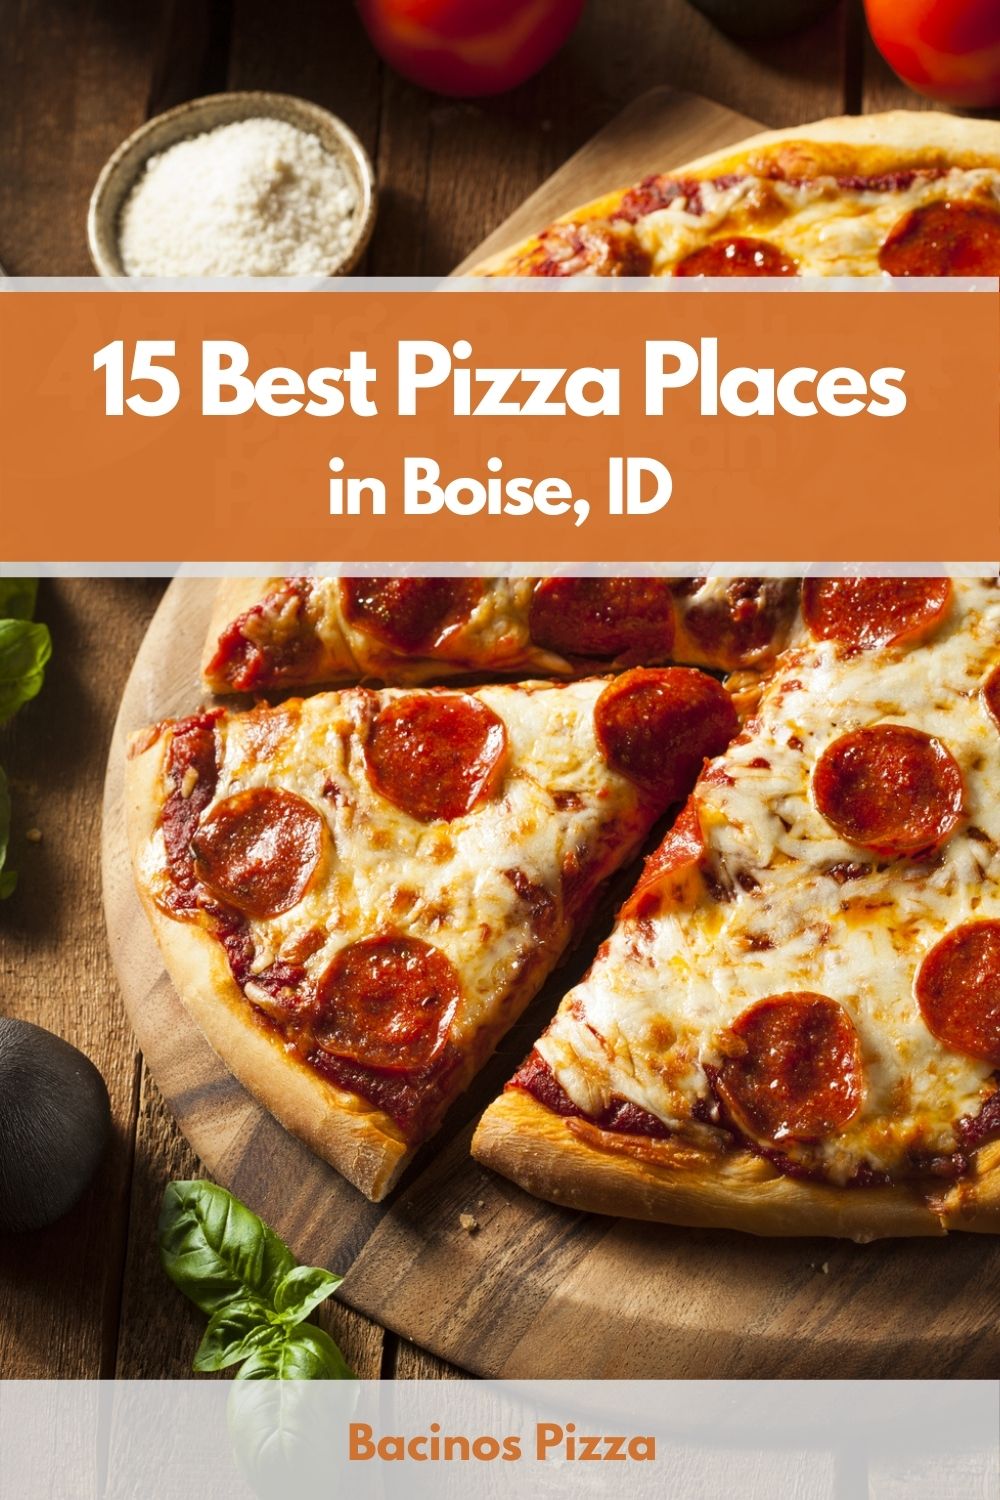 15 Best Pizza Places in Boise, ID pin